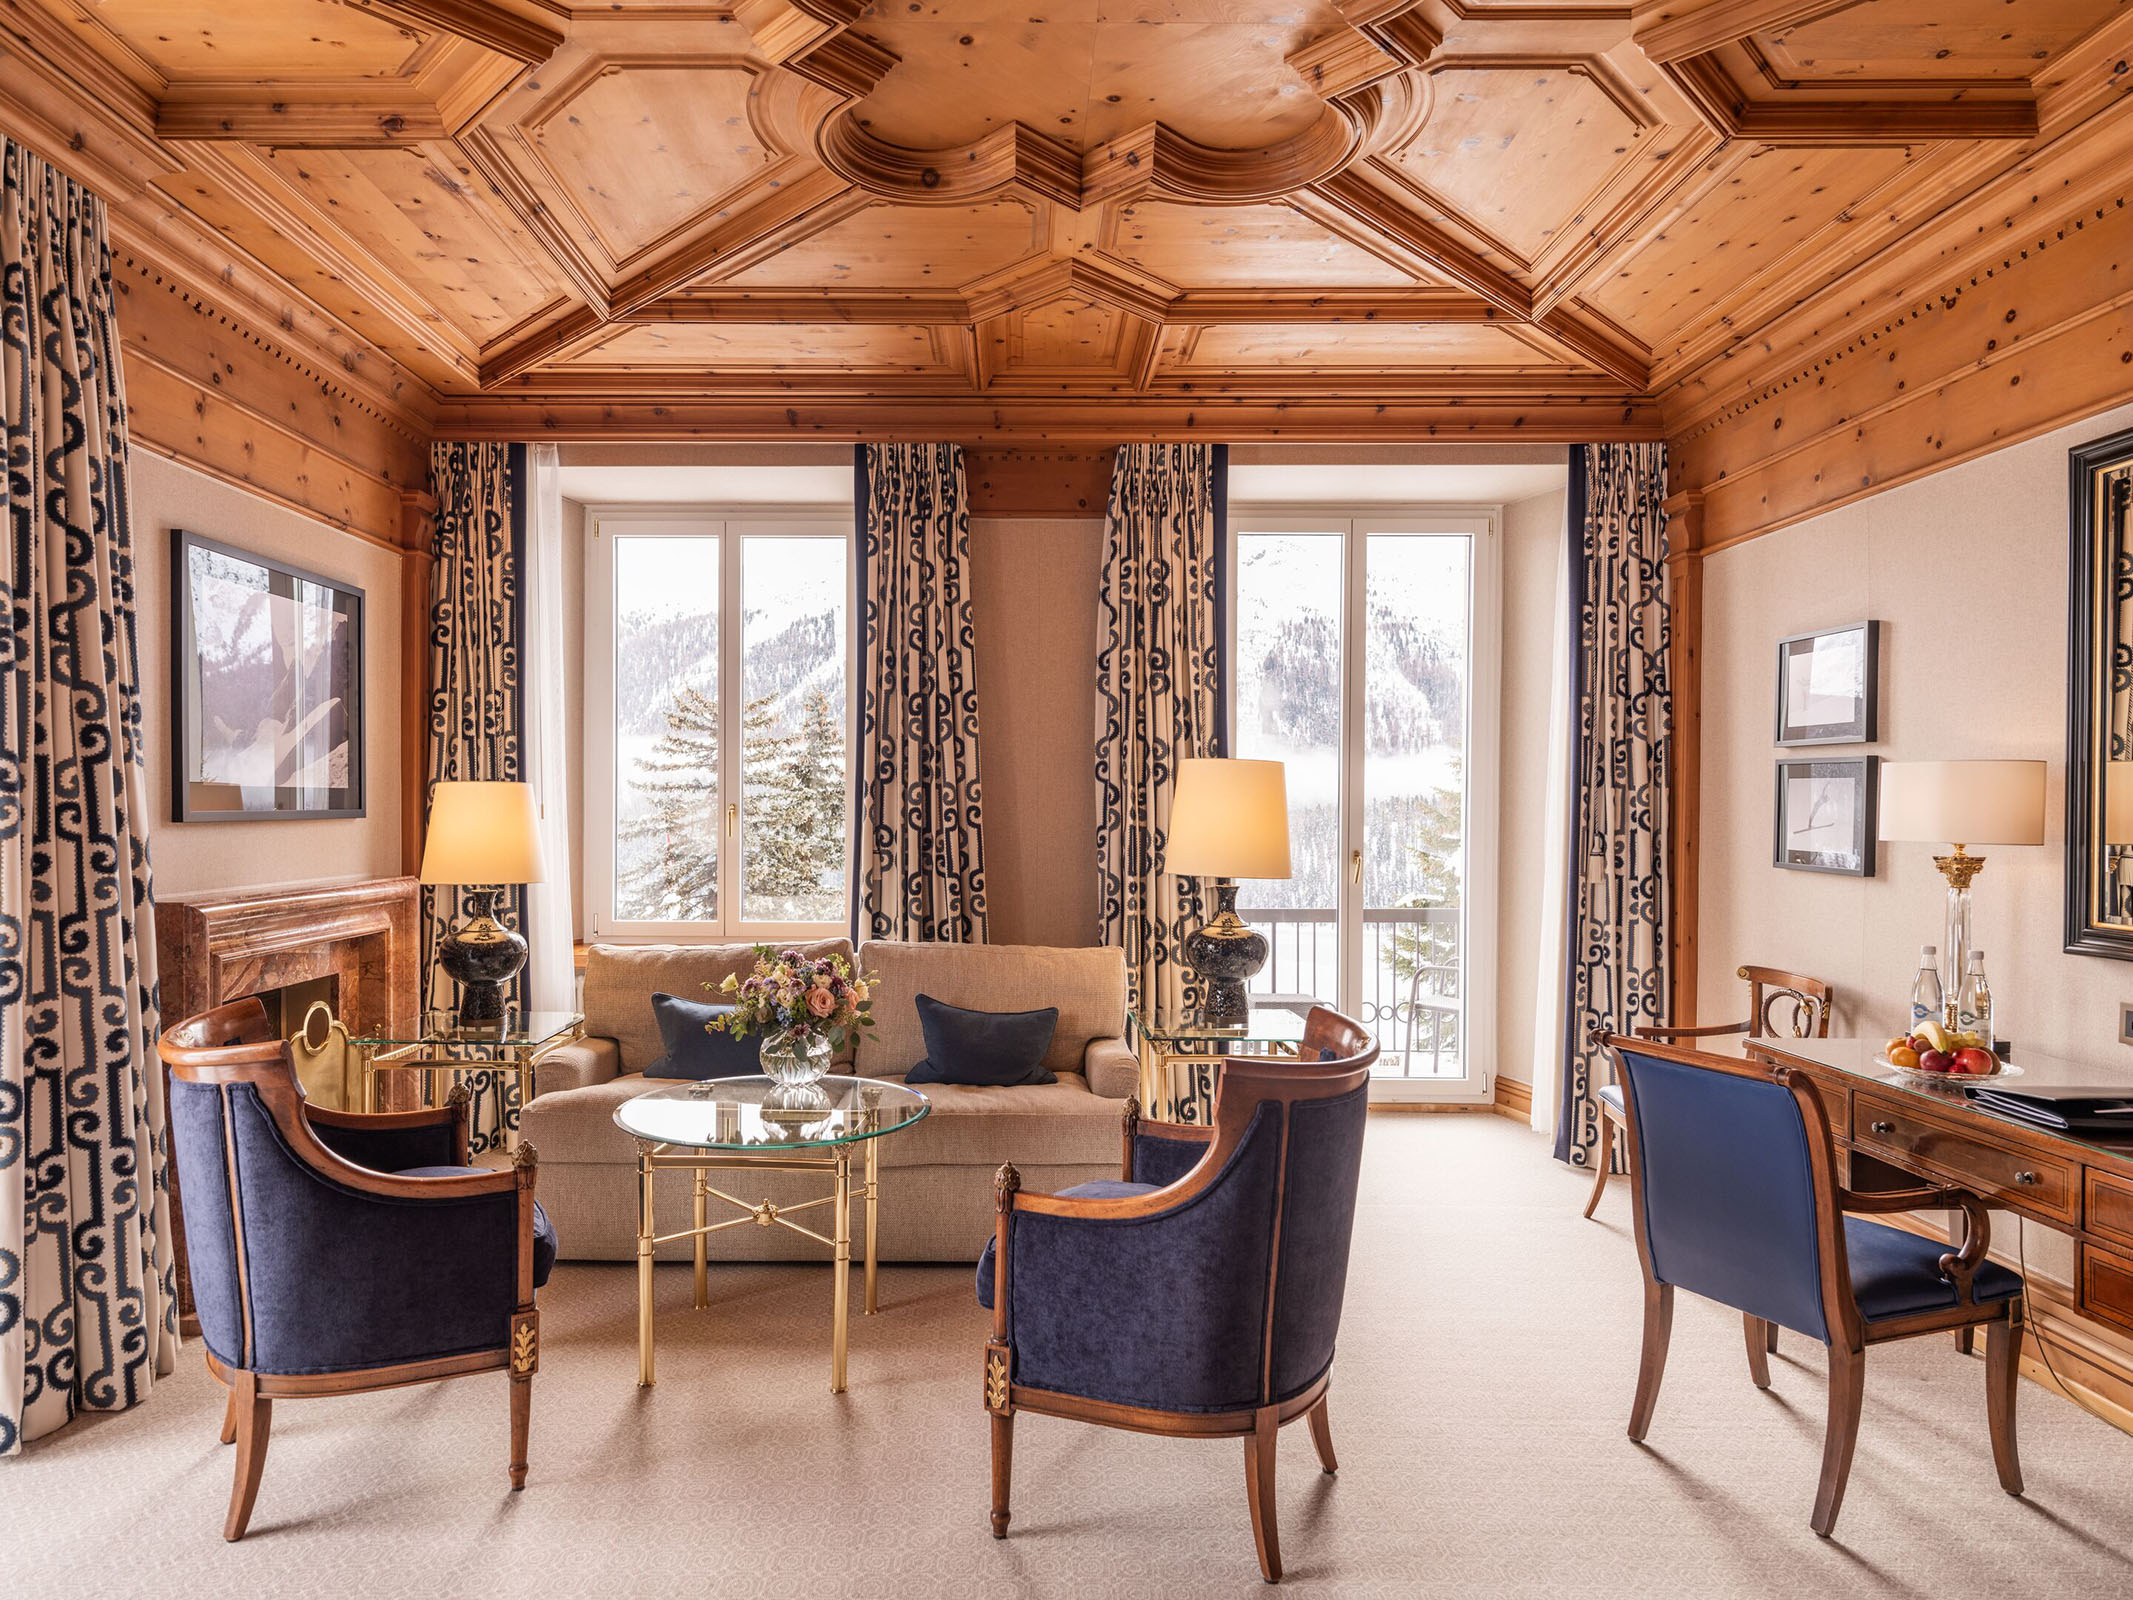 Swiss Deluxe Hotels Kulm Hotel Medium Traditional Deluxe Junior Suite Lake Side South